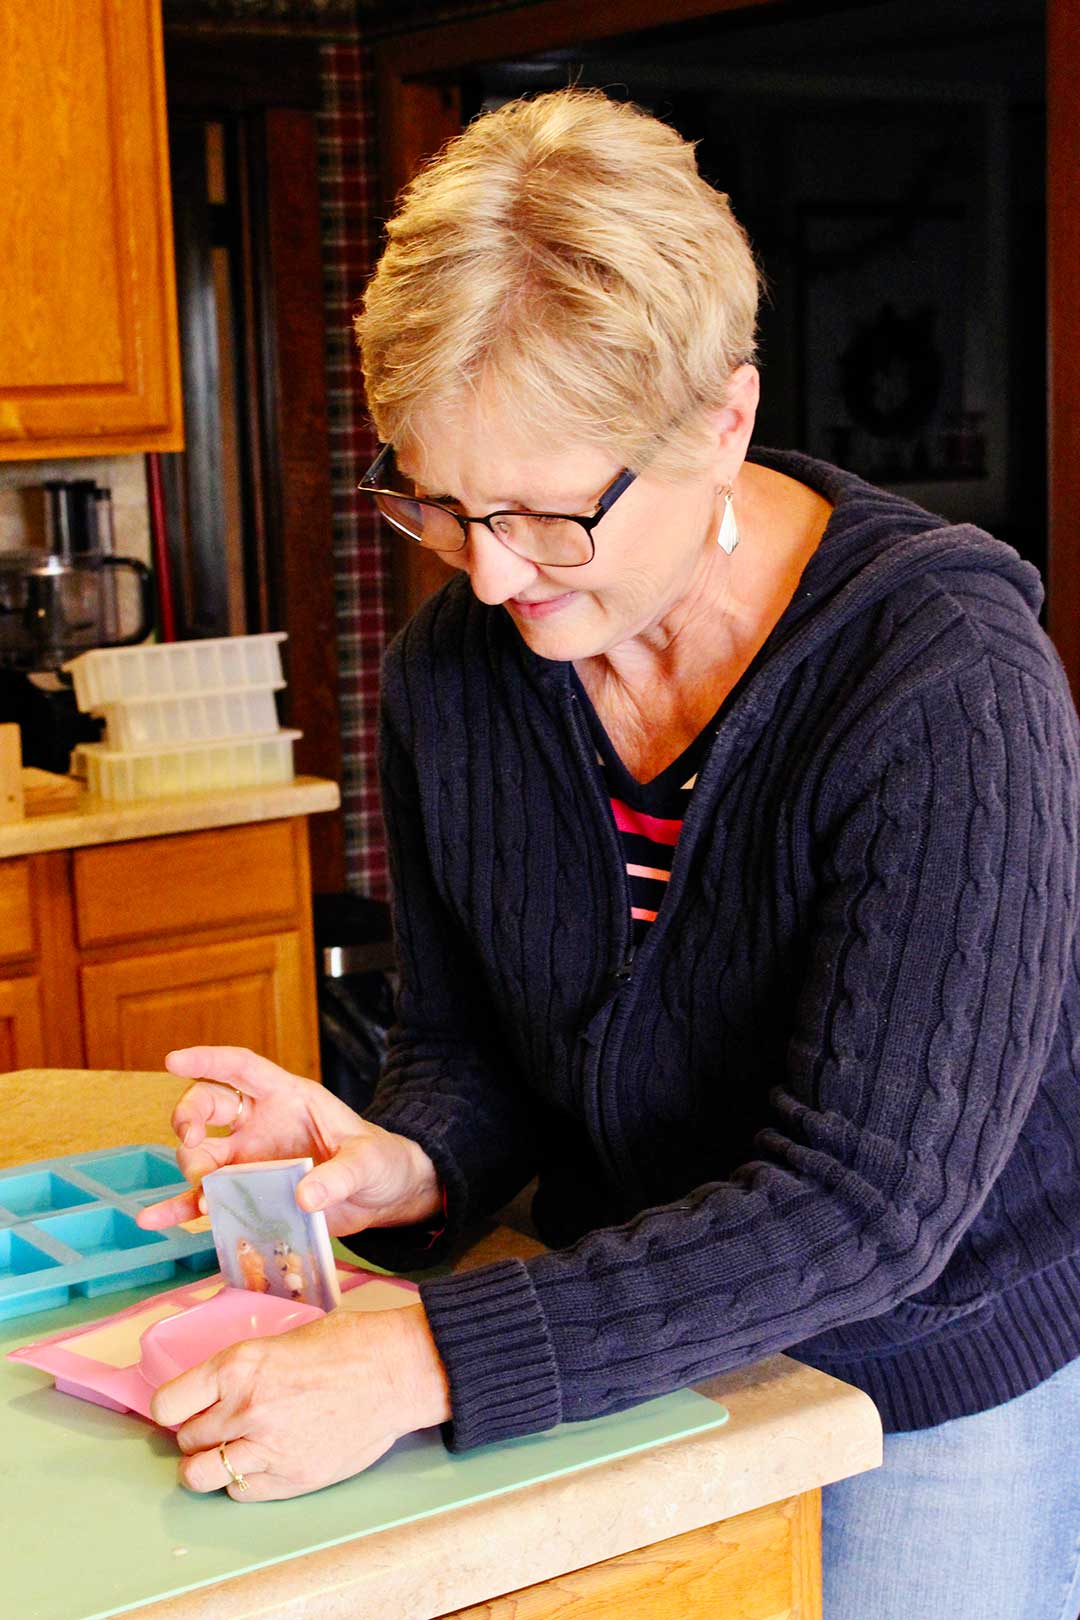 Woman peeling hardened soap out of pink silicone soap mold in kitchen.